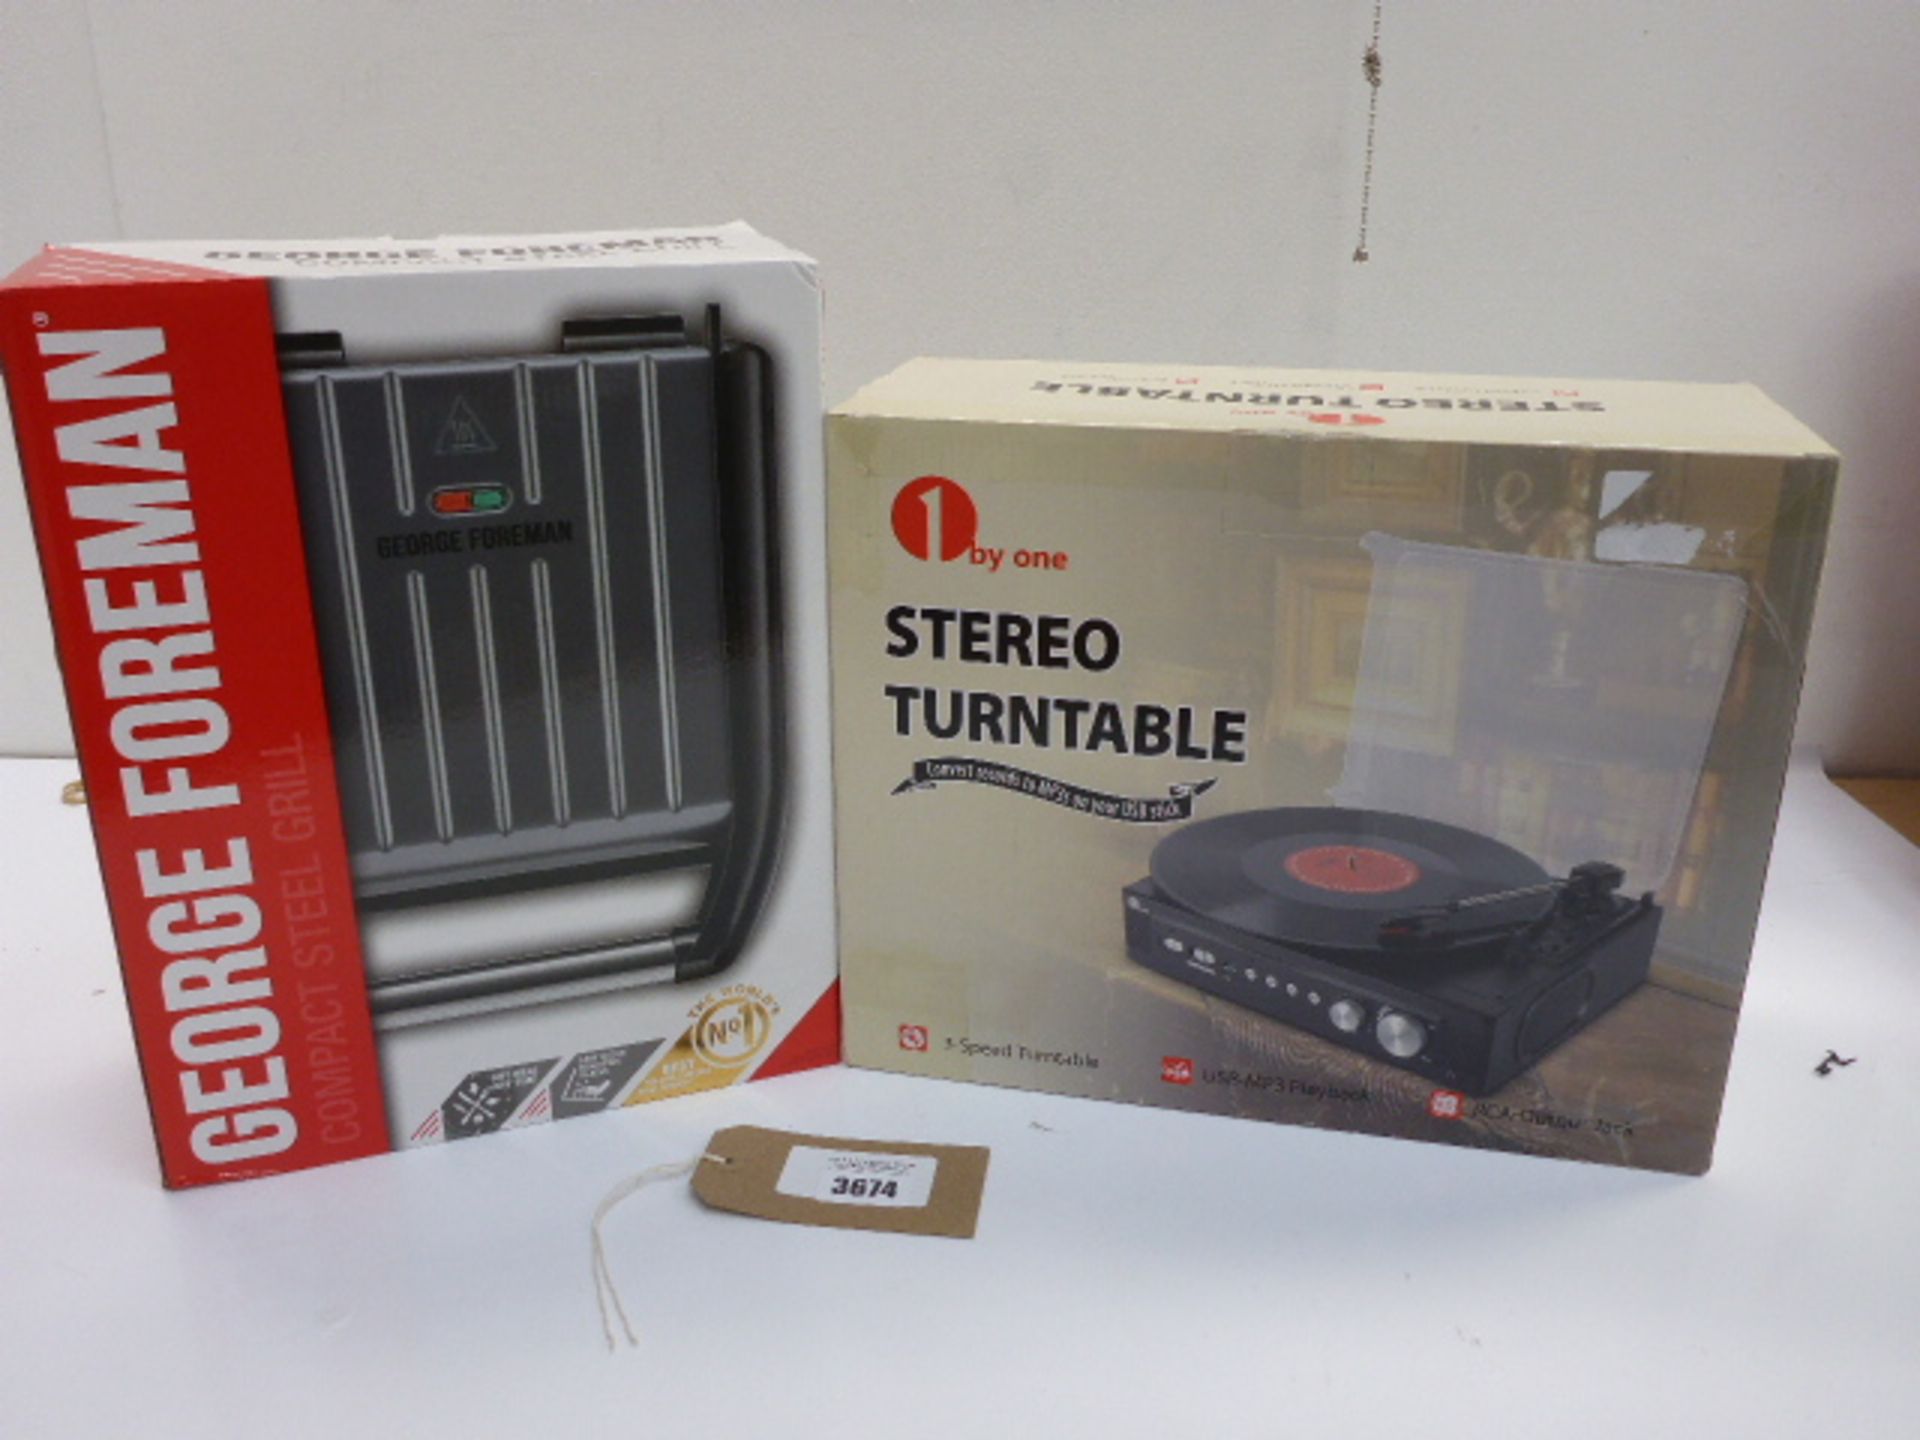 George Foreman compact steel grill and Stereo turntable